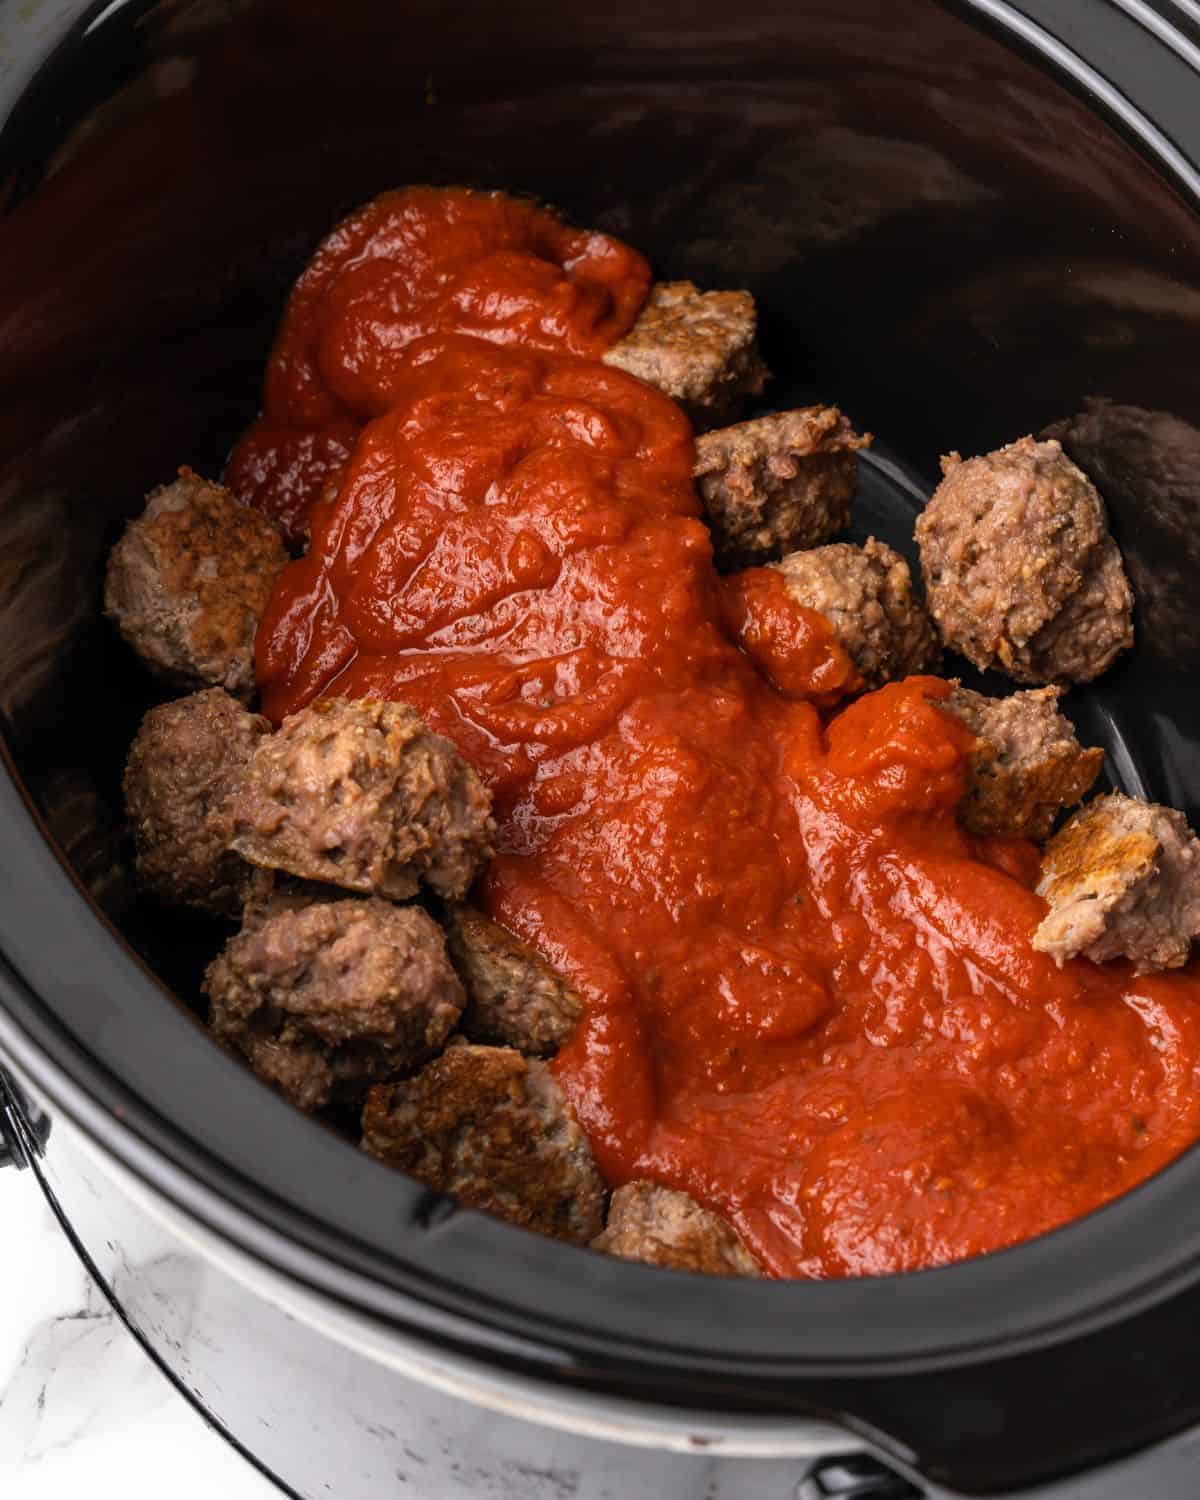 meatballs and sauce in the slow cooker.